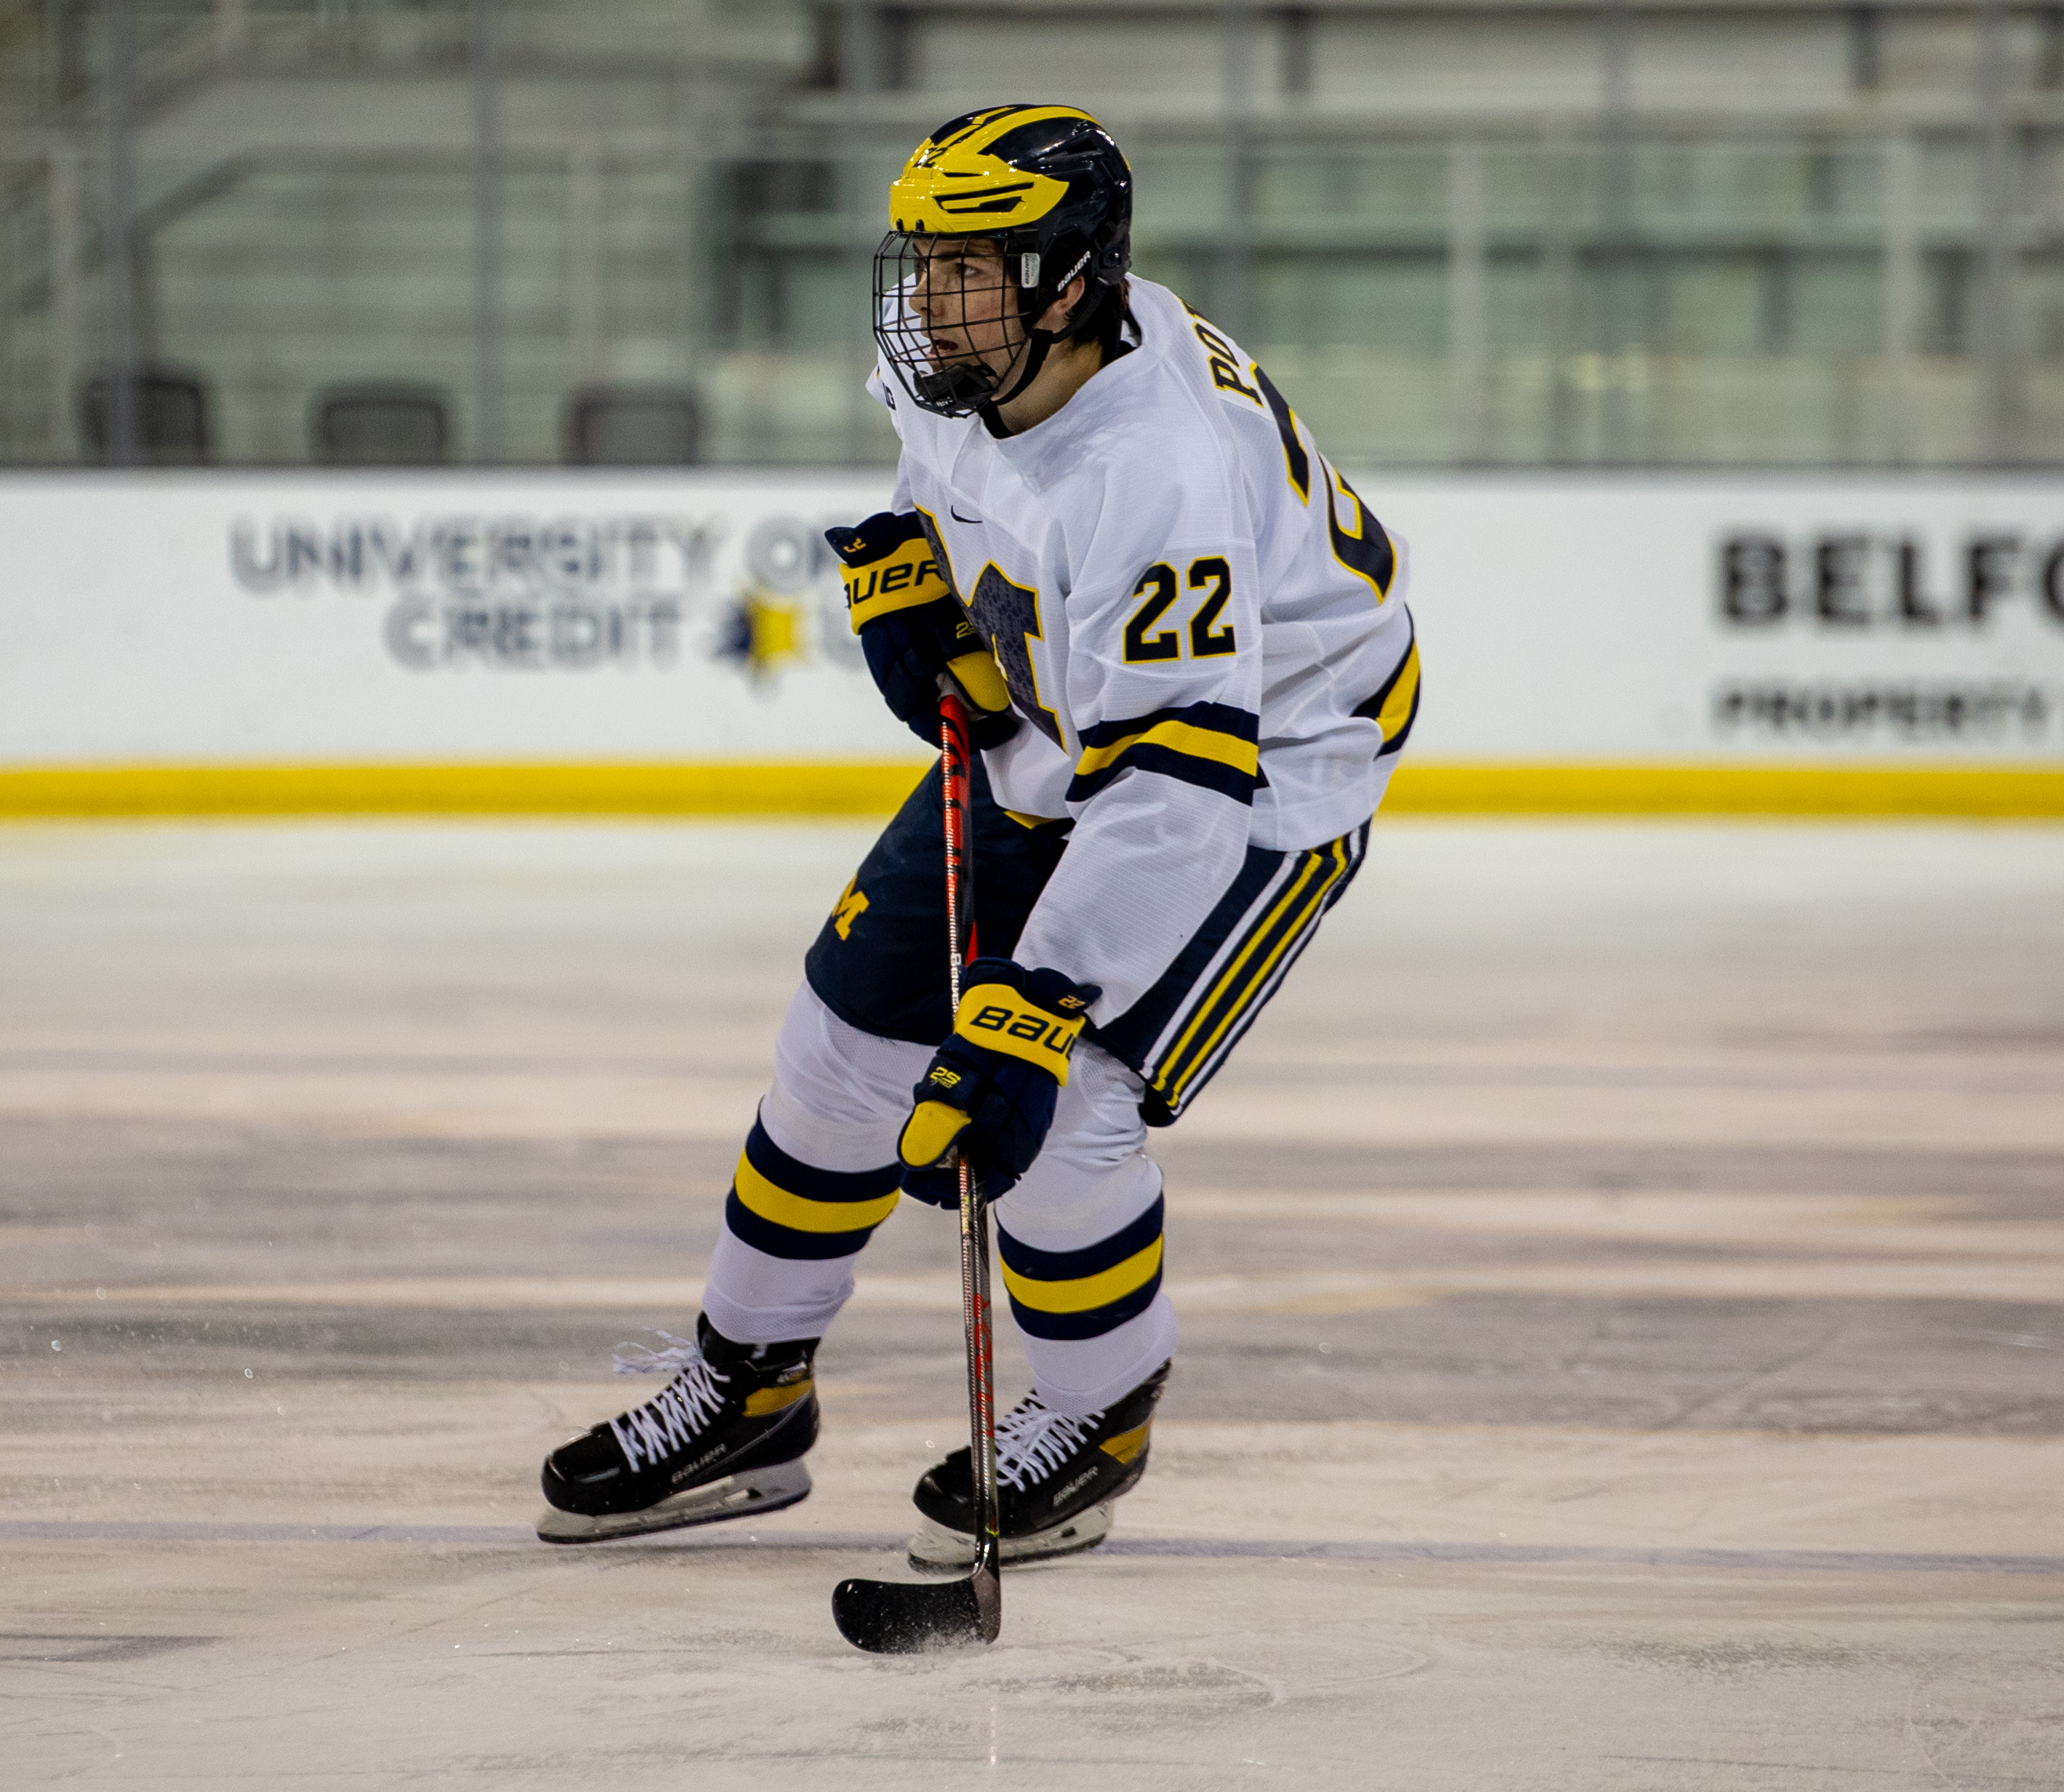 Michigan's Owen Power, a potential No. 1 draft pick, 'leaning' toward  return to Wolverines